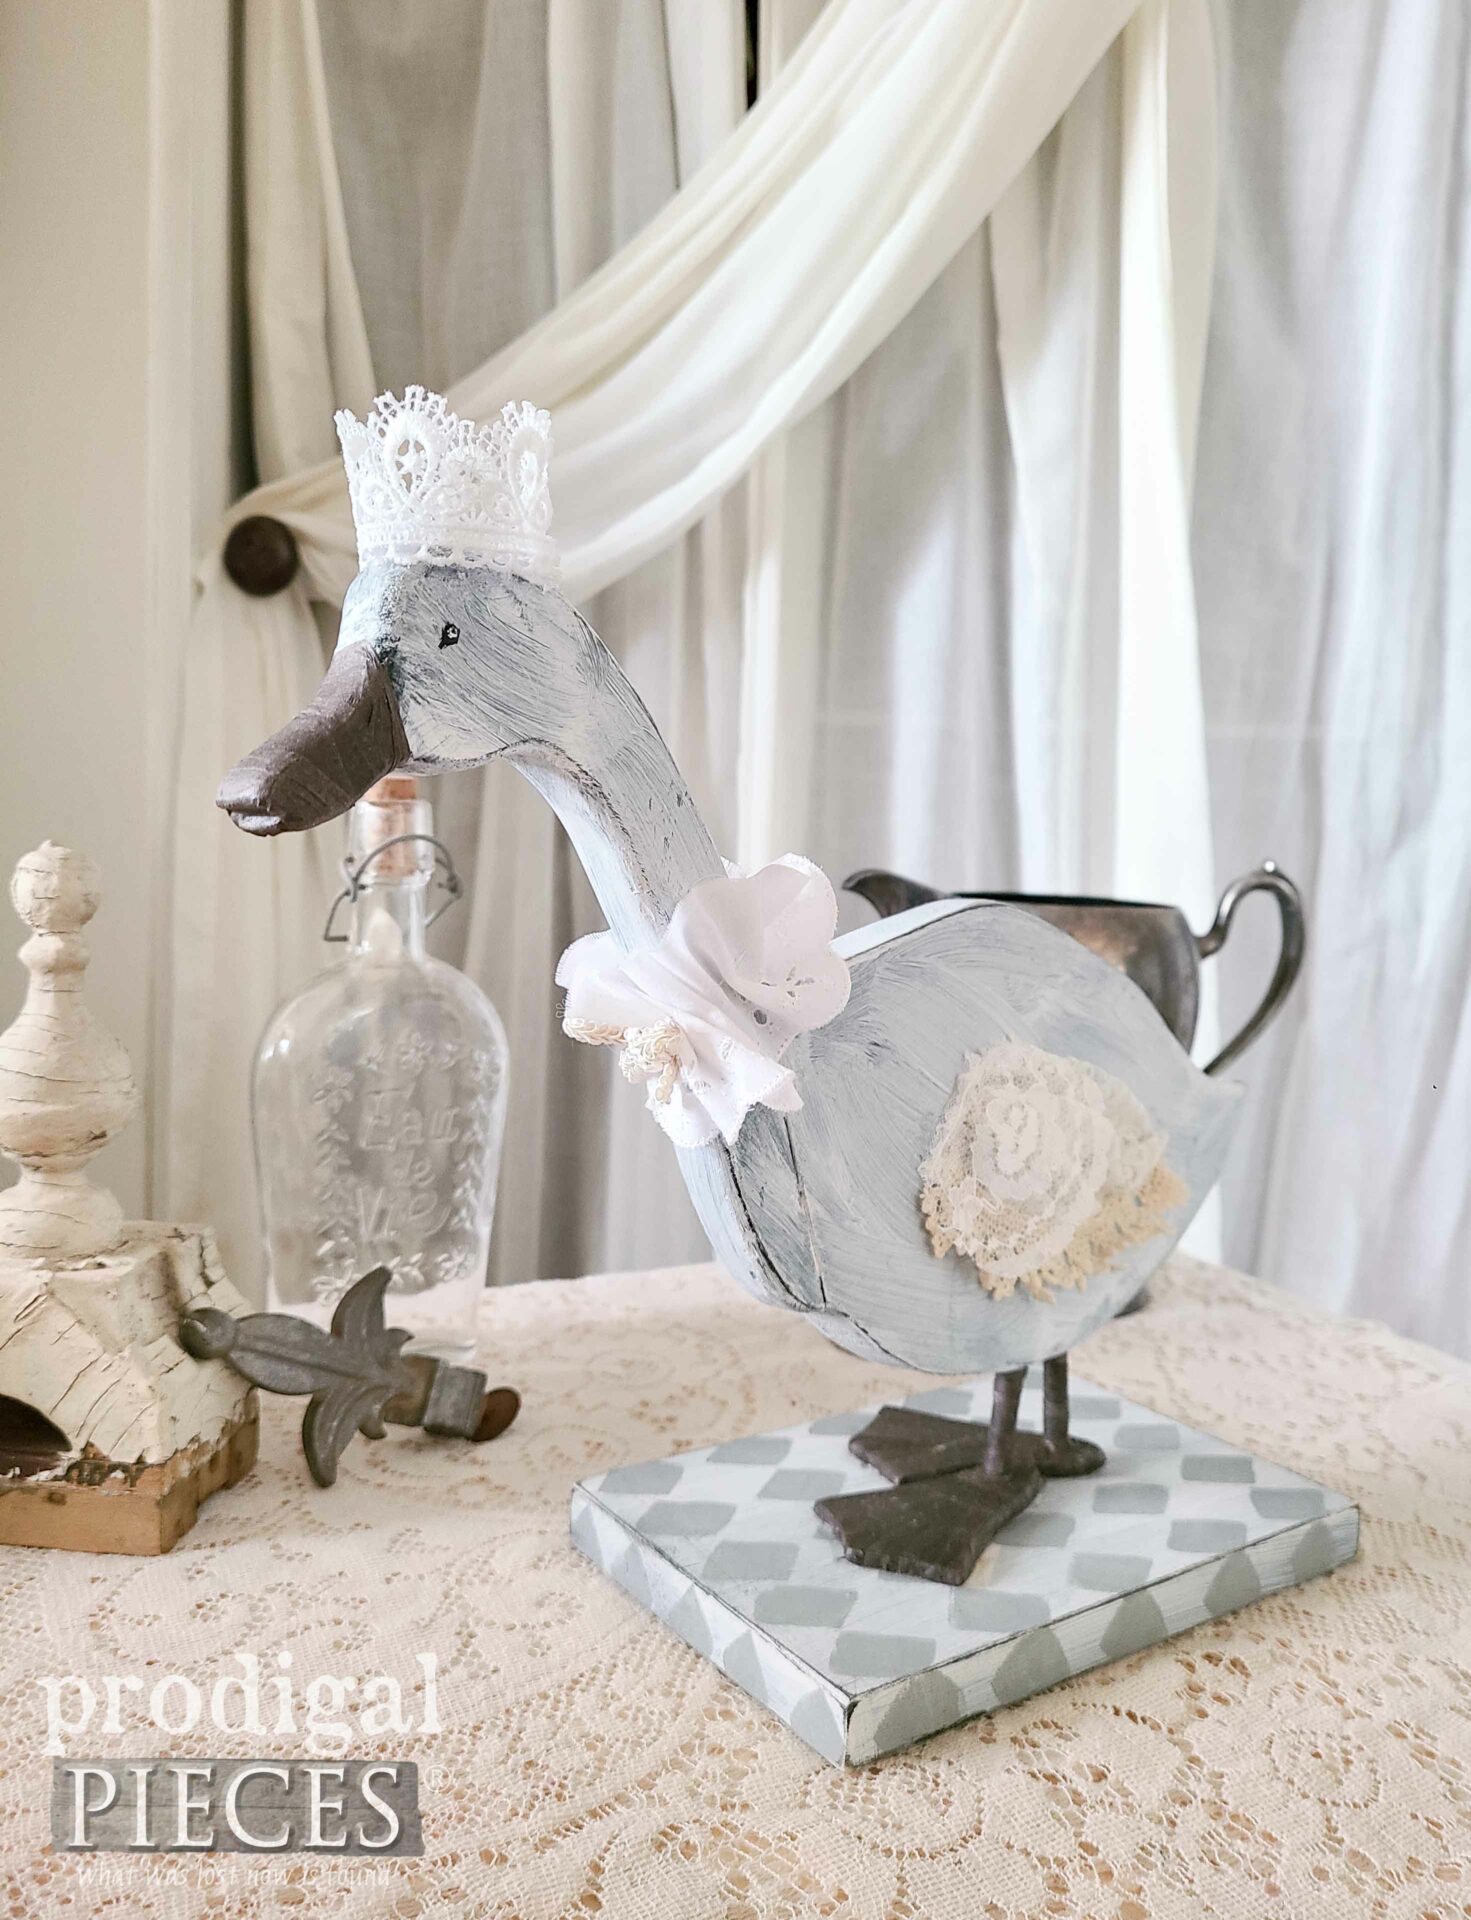 Handmade Shabby Chic Goose Statue | Thrifted Art by Larissa of Prodigal Pieces | prodigalpieces.com #prodigalpieces #handmade #diy #french